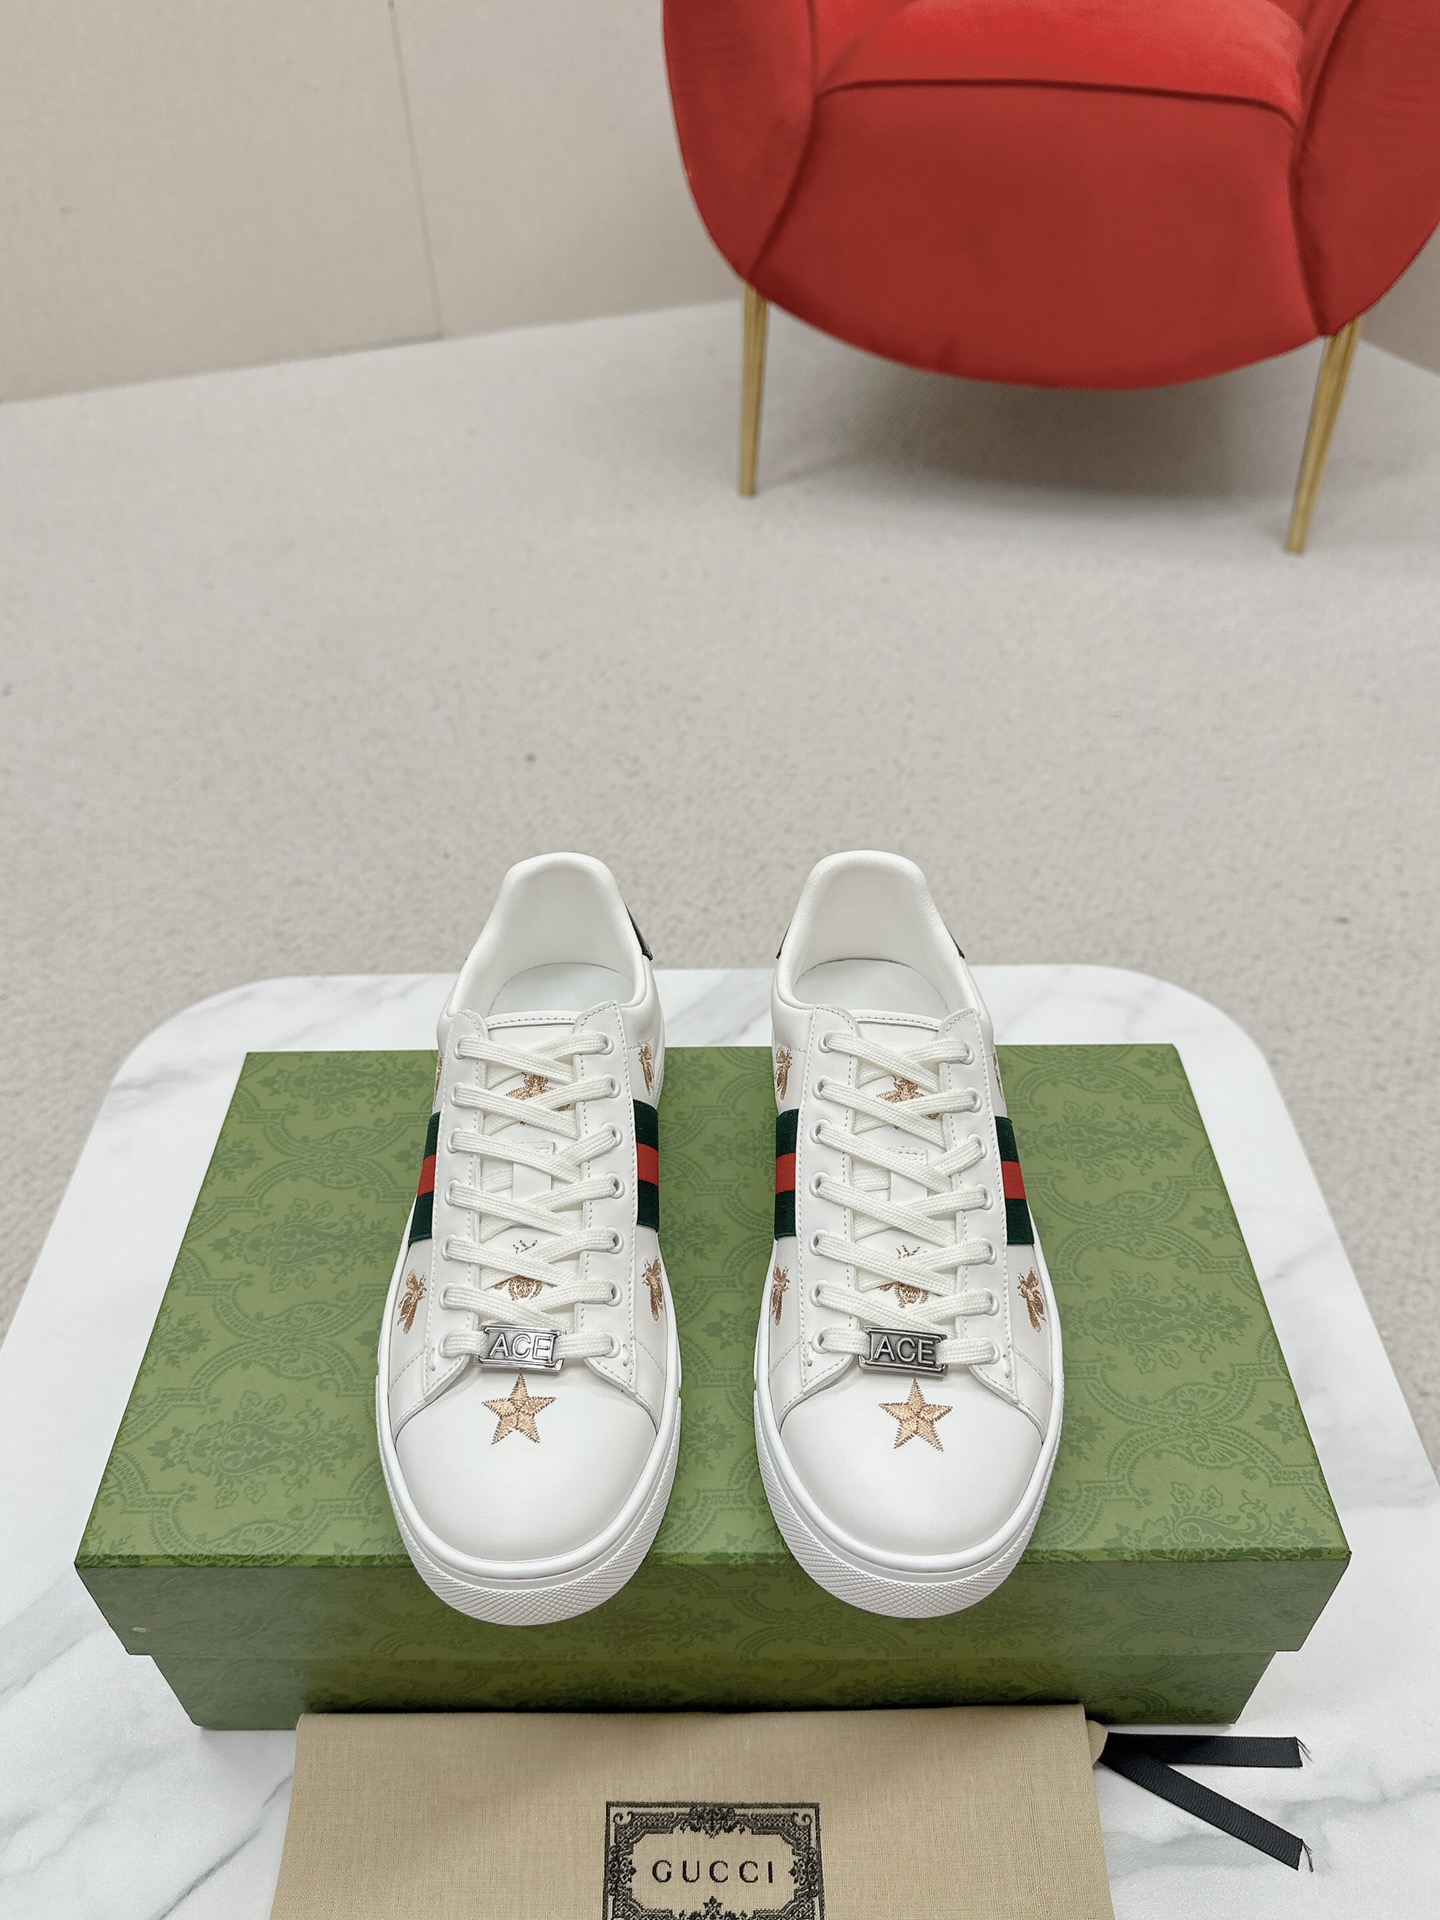 Gucci Luxury
 Skateboard Shoes Sneakers White Embroidery Unisex Women Men Cowhide Rubber Casual